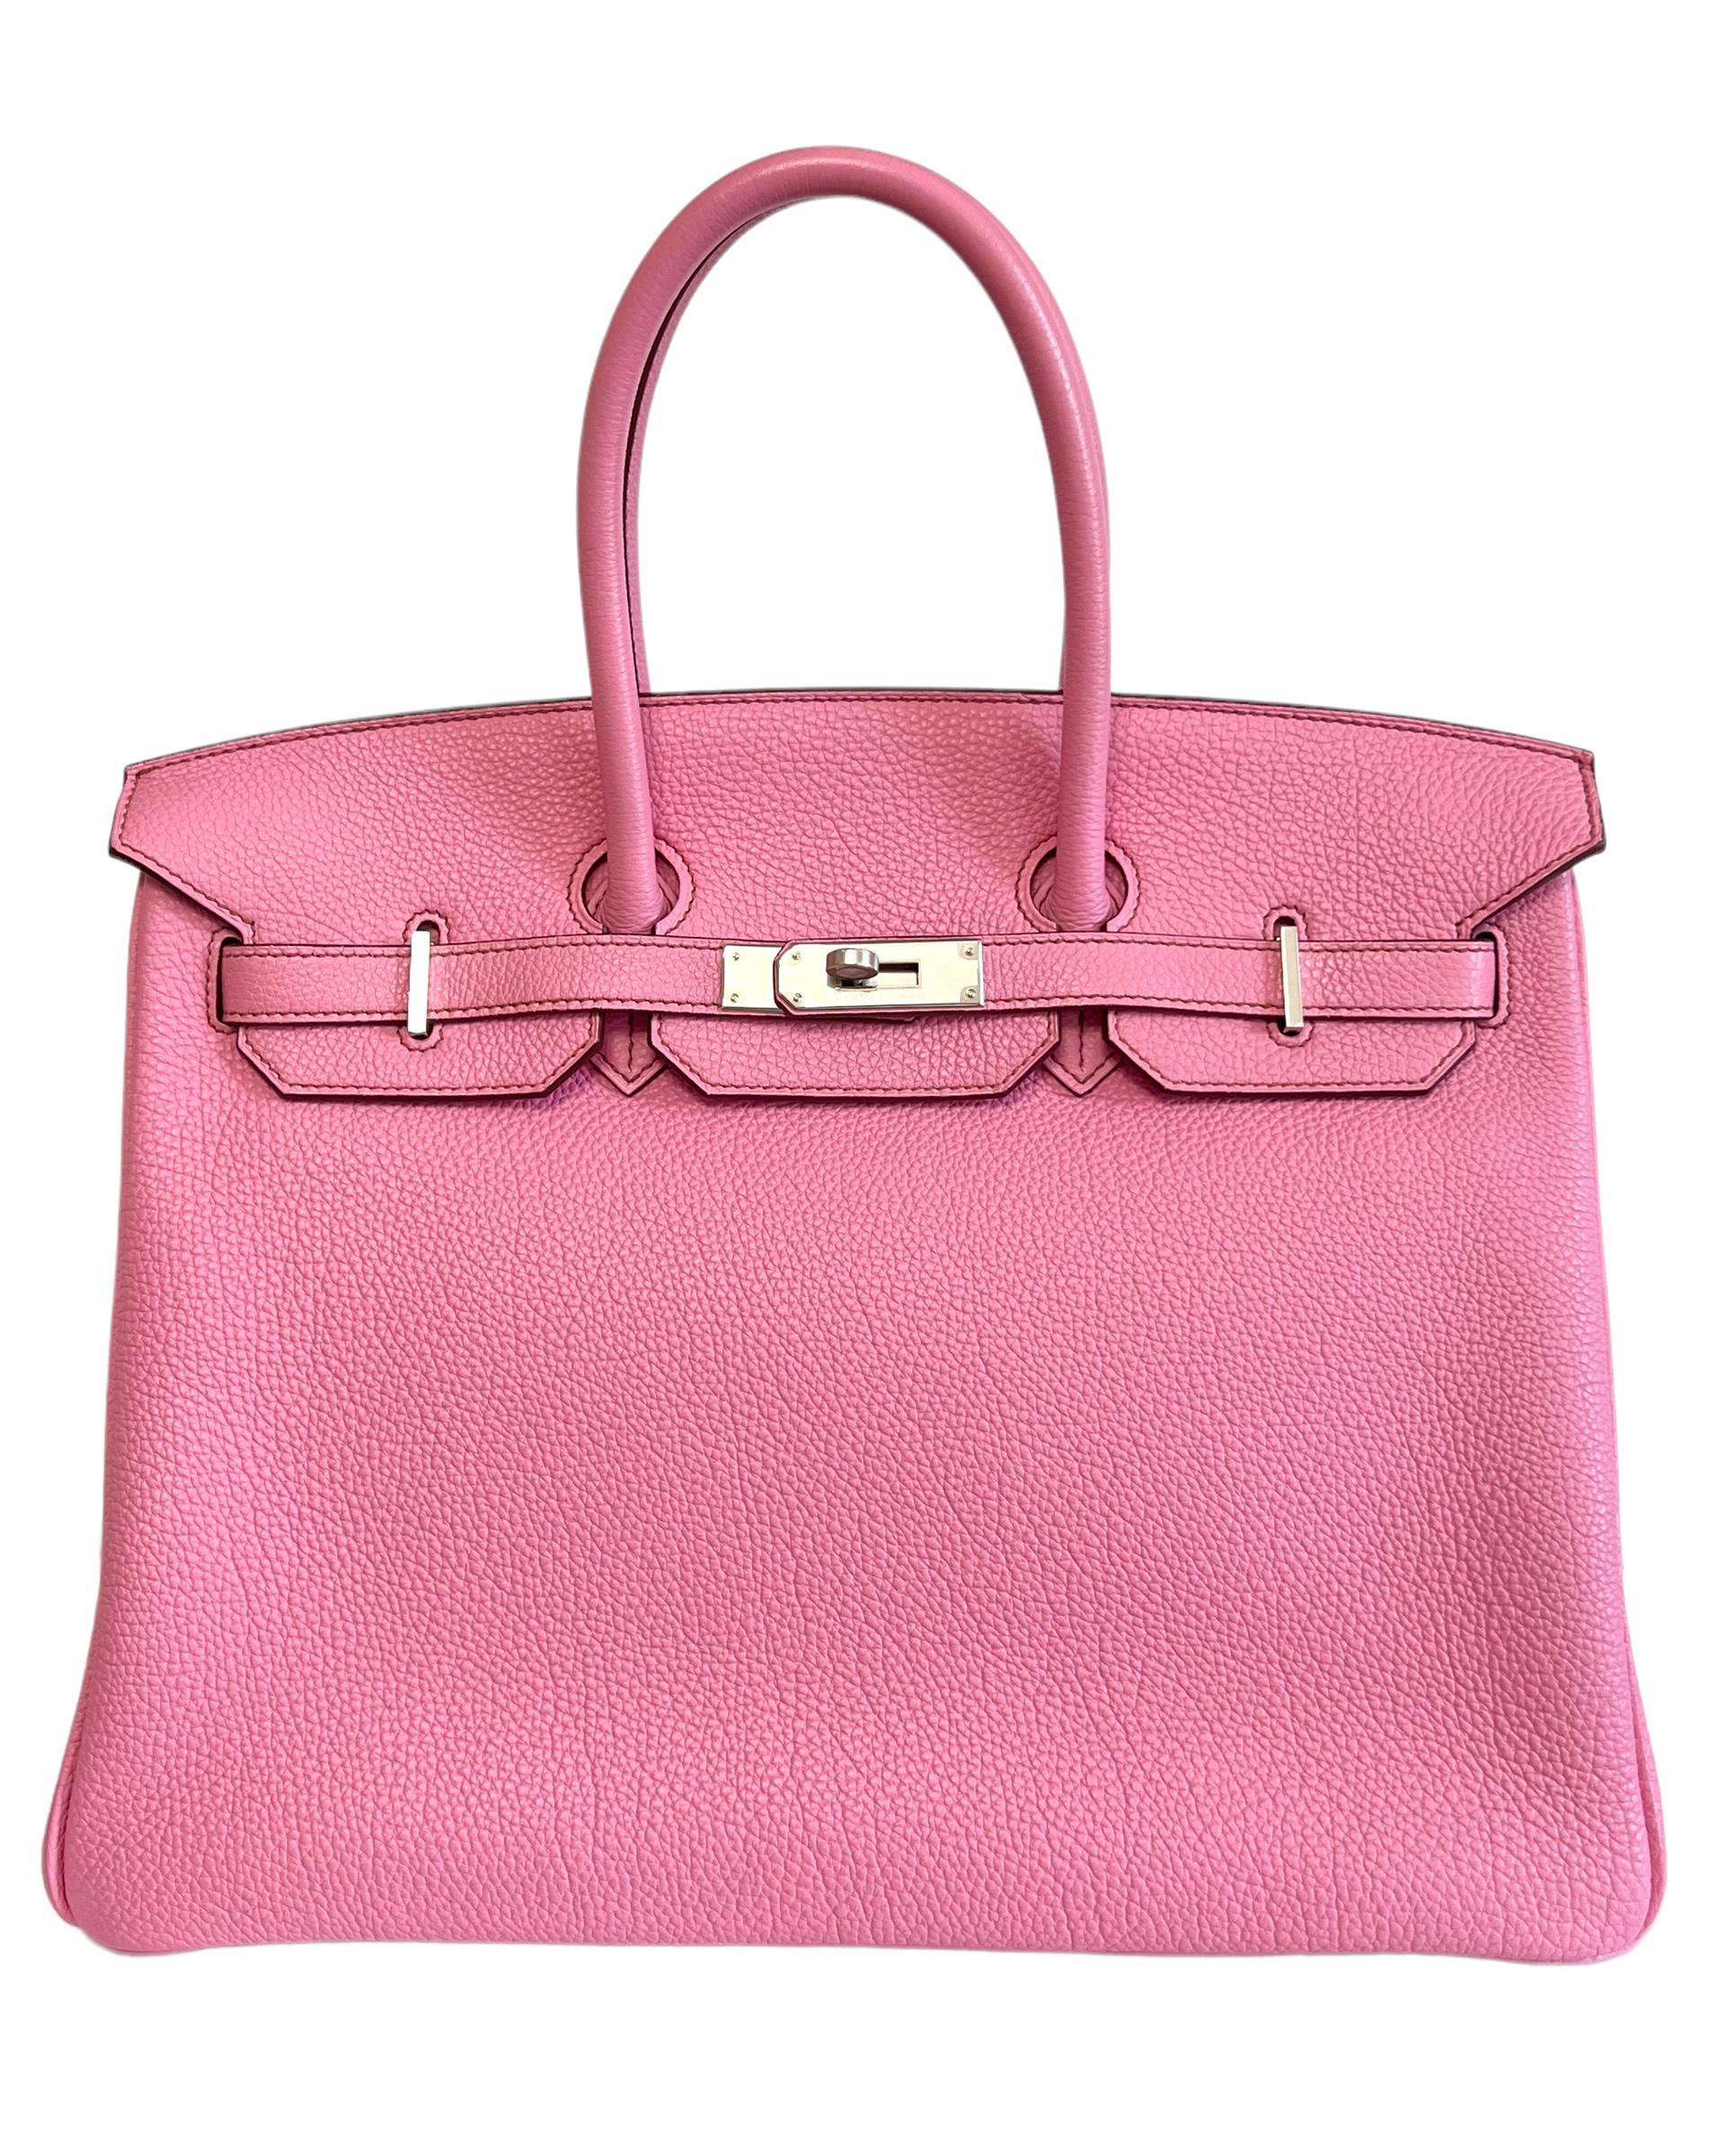 RARE Beautiful Hermes Birkin 35 Bubblegum Pink Togo Leather complimented by Palladium Hardware. Pristine Condition with all plastic on hardware Excellent corners, structure and interior! Light Scratching on feet.


Shop with Confidence with Lux